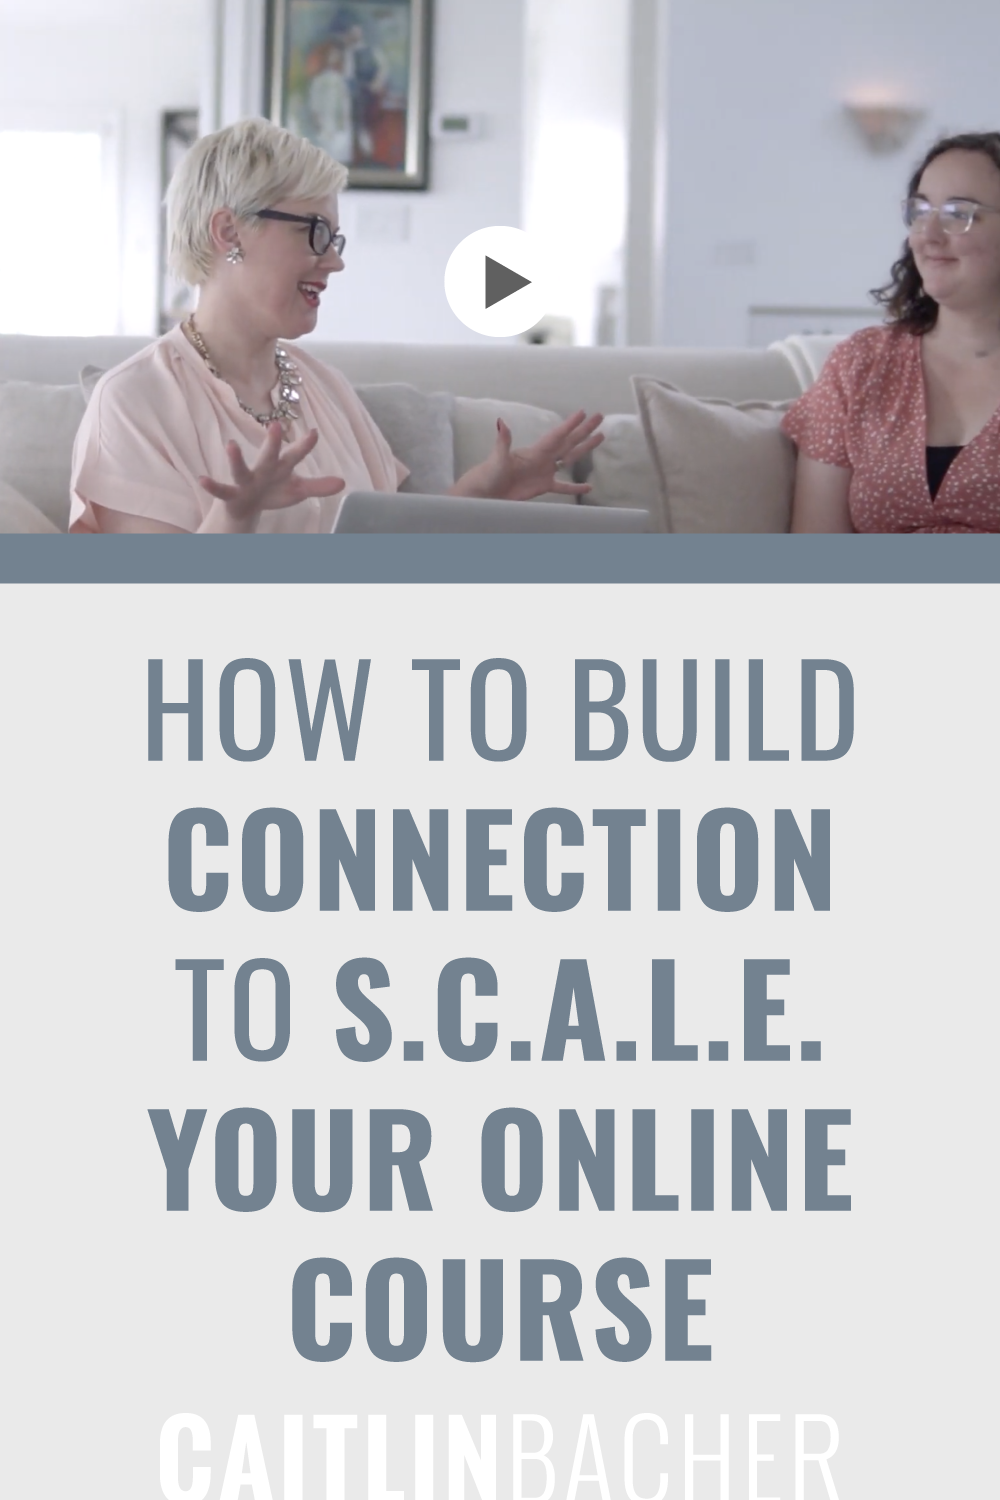 How To Build CONNECTION To S.C.A.L.E. Your Online Course | Scale With Success | Course Creator | Business Tips | caitlinbacher.com